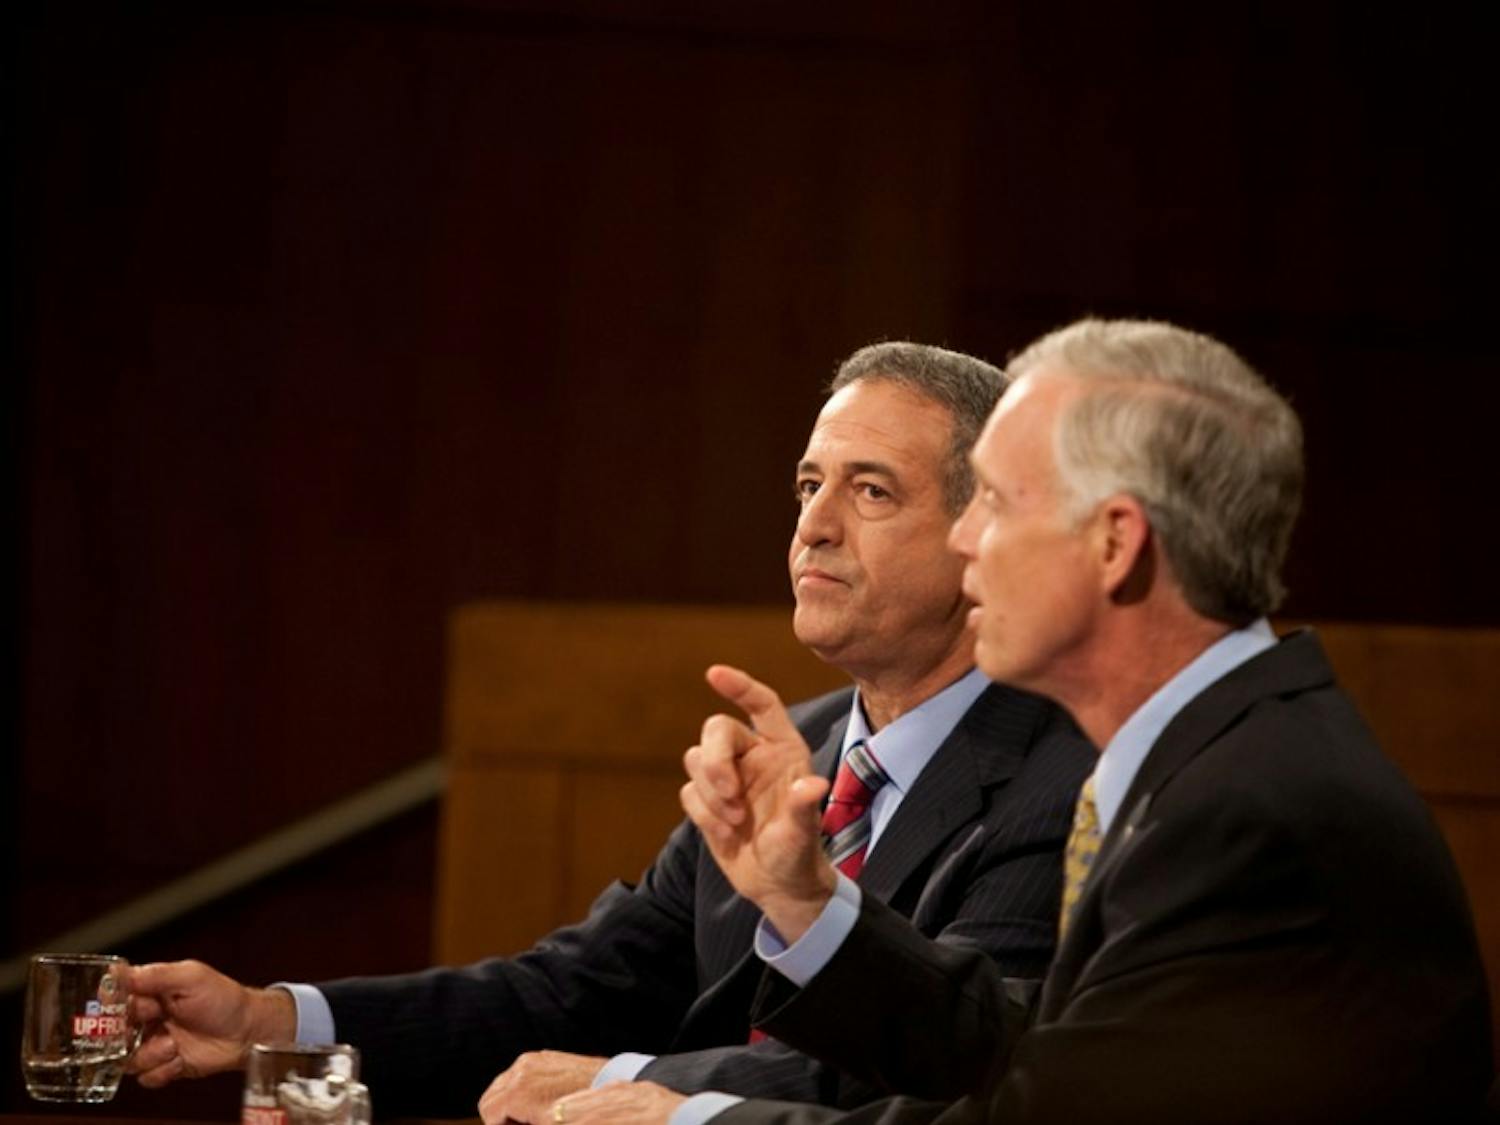 IMAGE: Johnson and Feingold